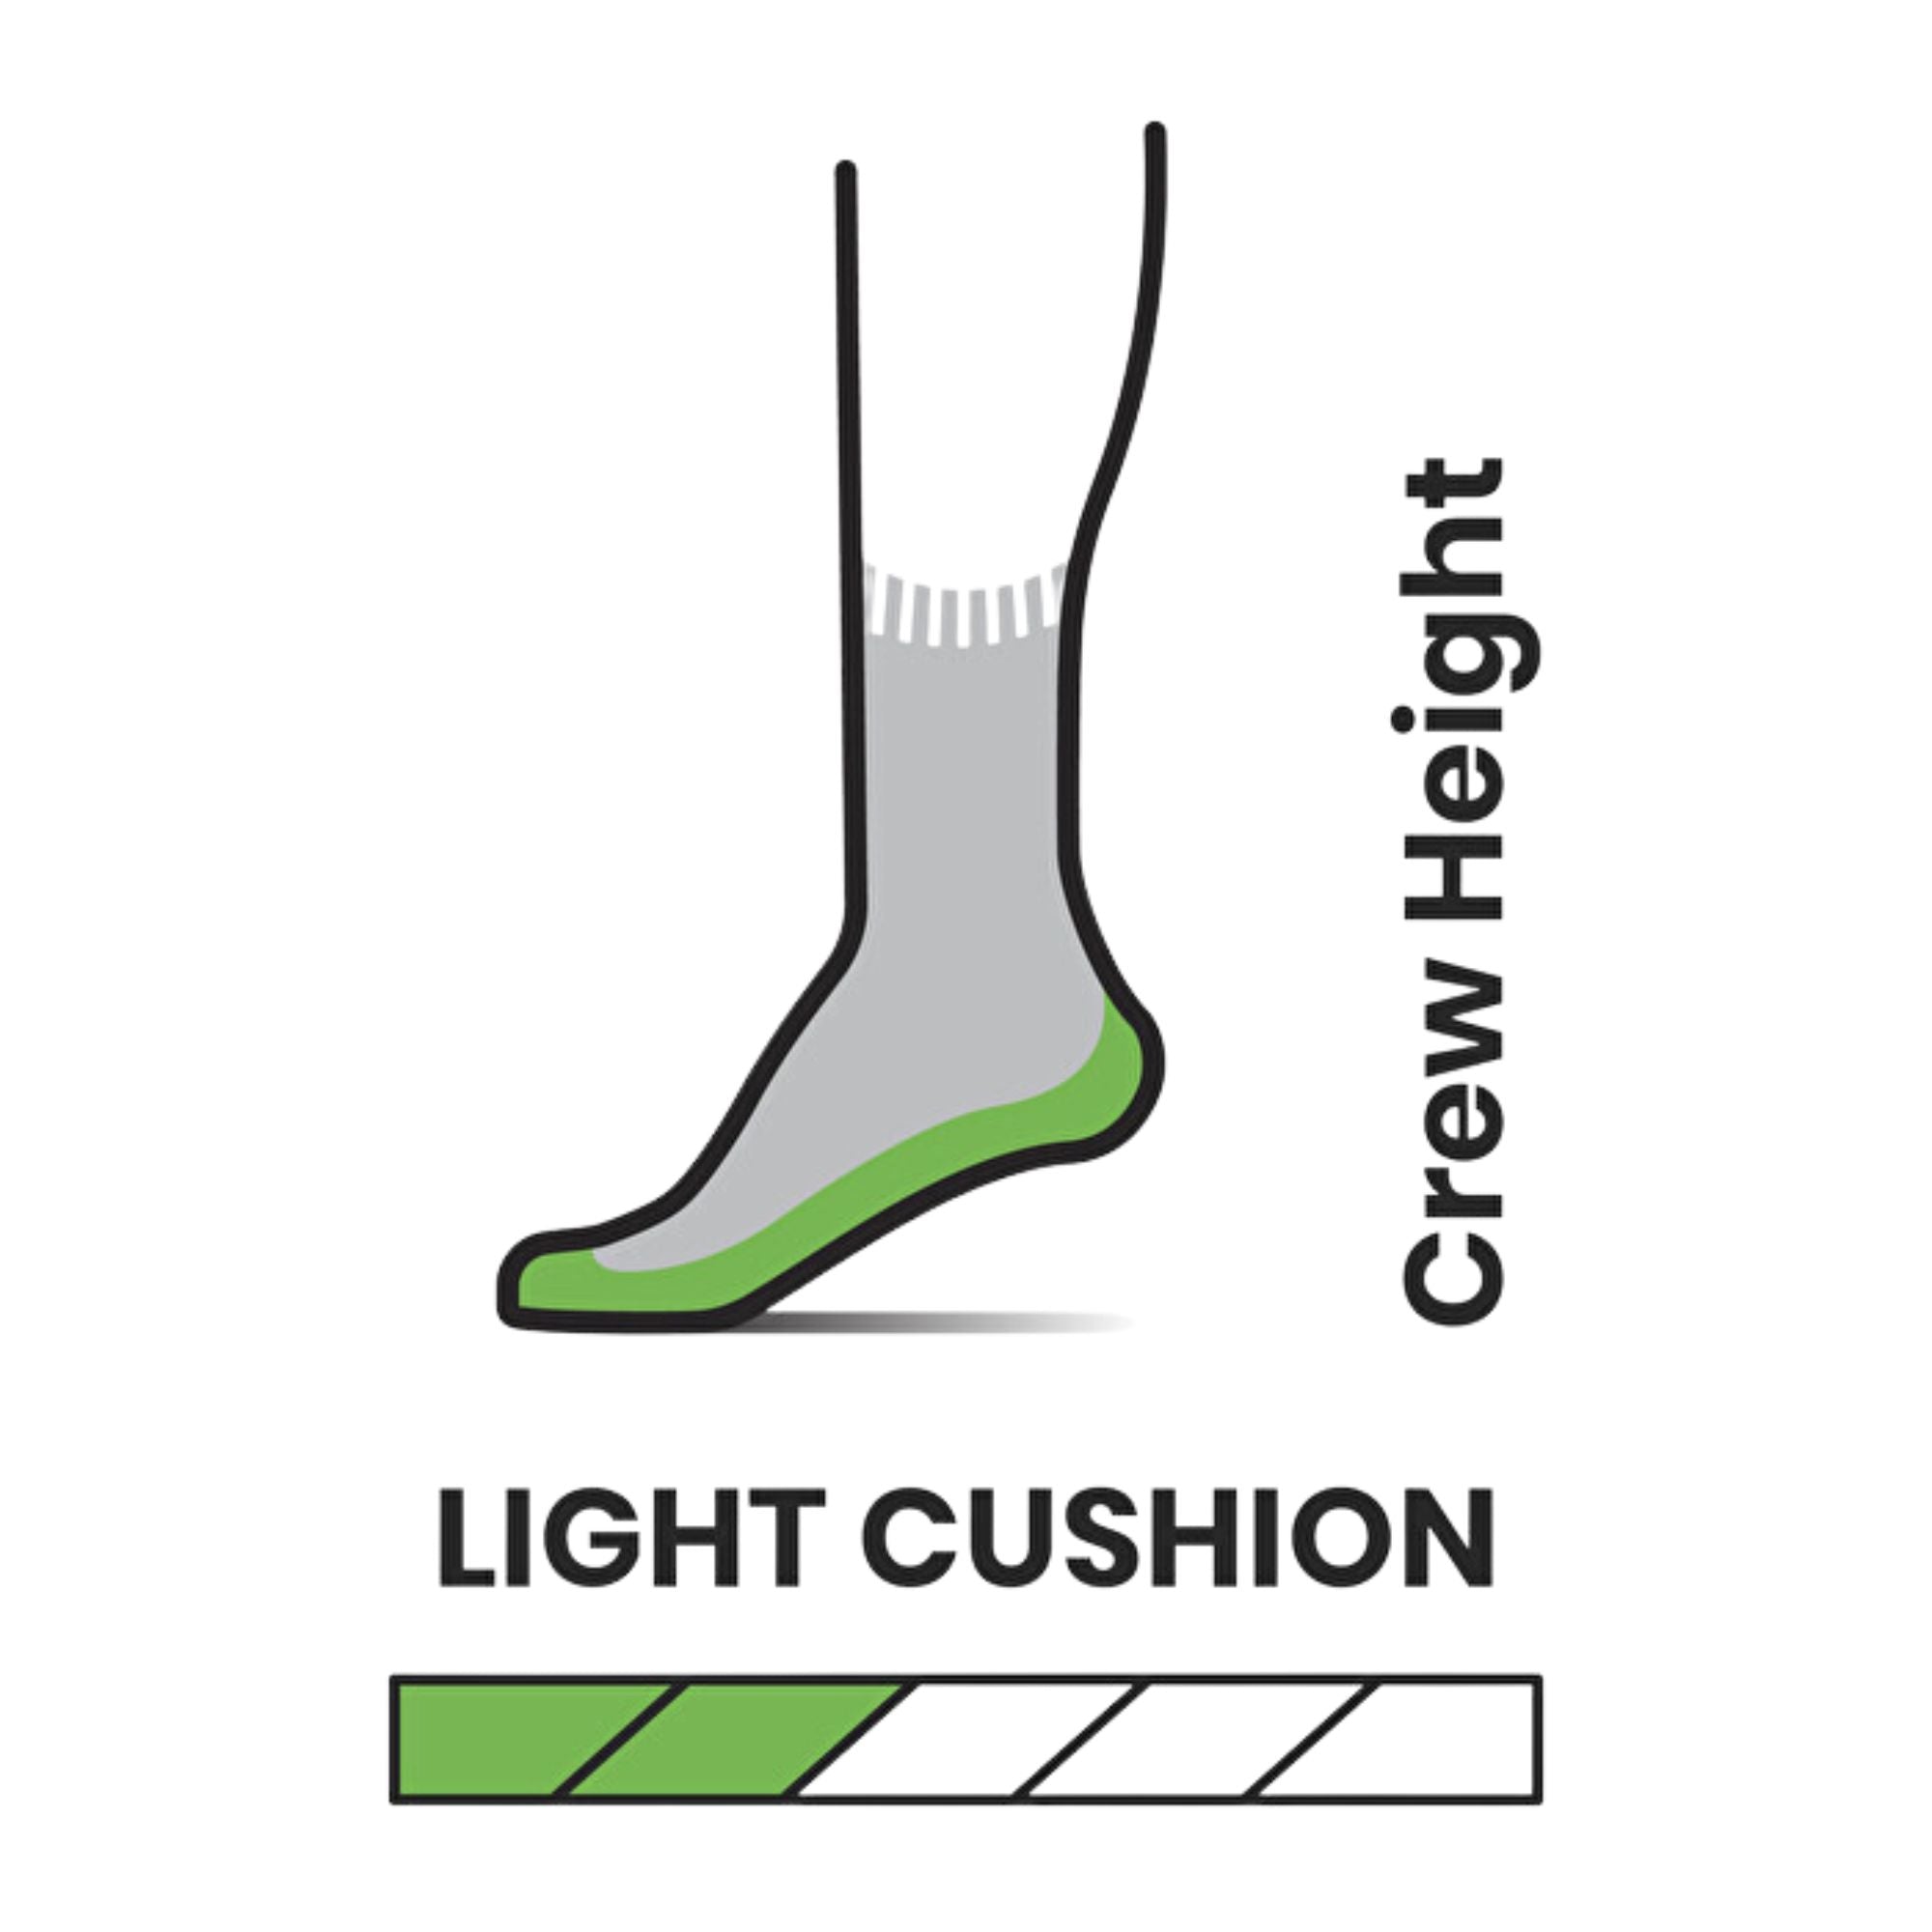 Smartwool Hike Light Cushion Crew Socks | SMARTWOOL | Portwest - The Outdoor Shop